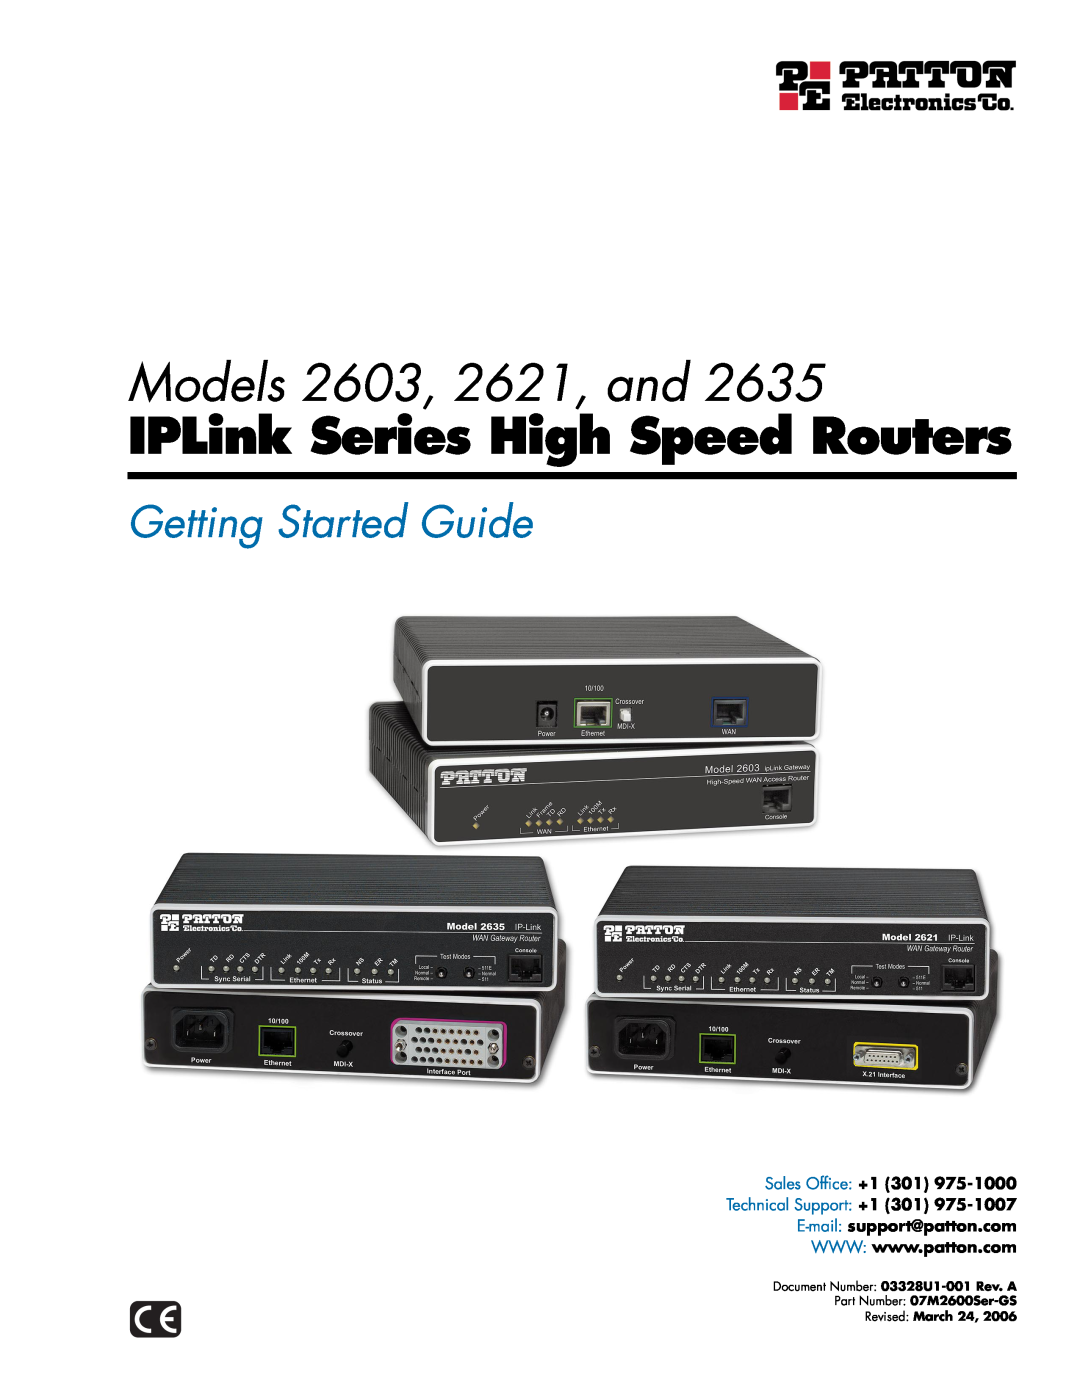 Patton electronic 2635 manual Models 2603, 2621, and, IPLink Series High Speed Routers, Getting Started Guide 